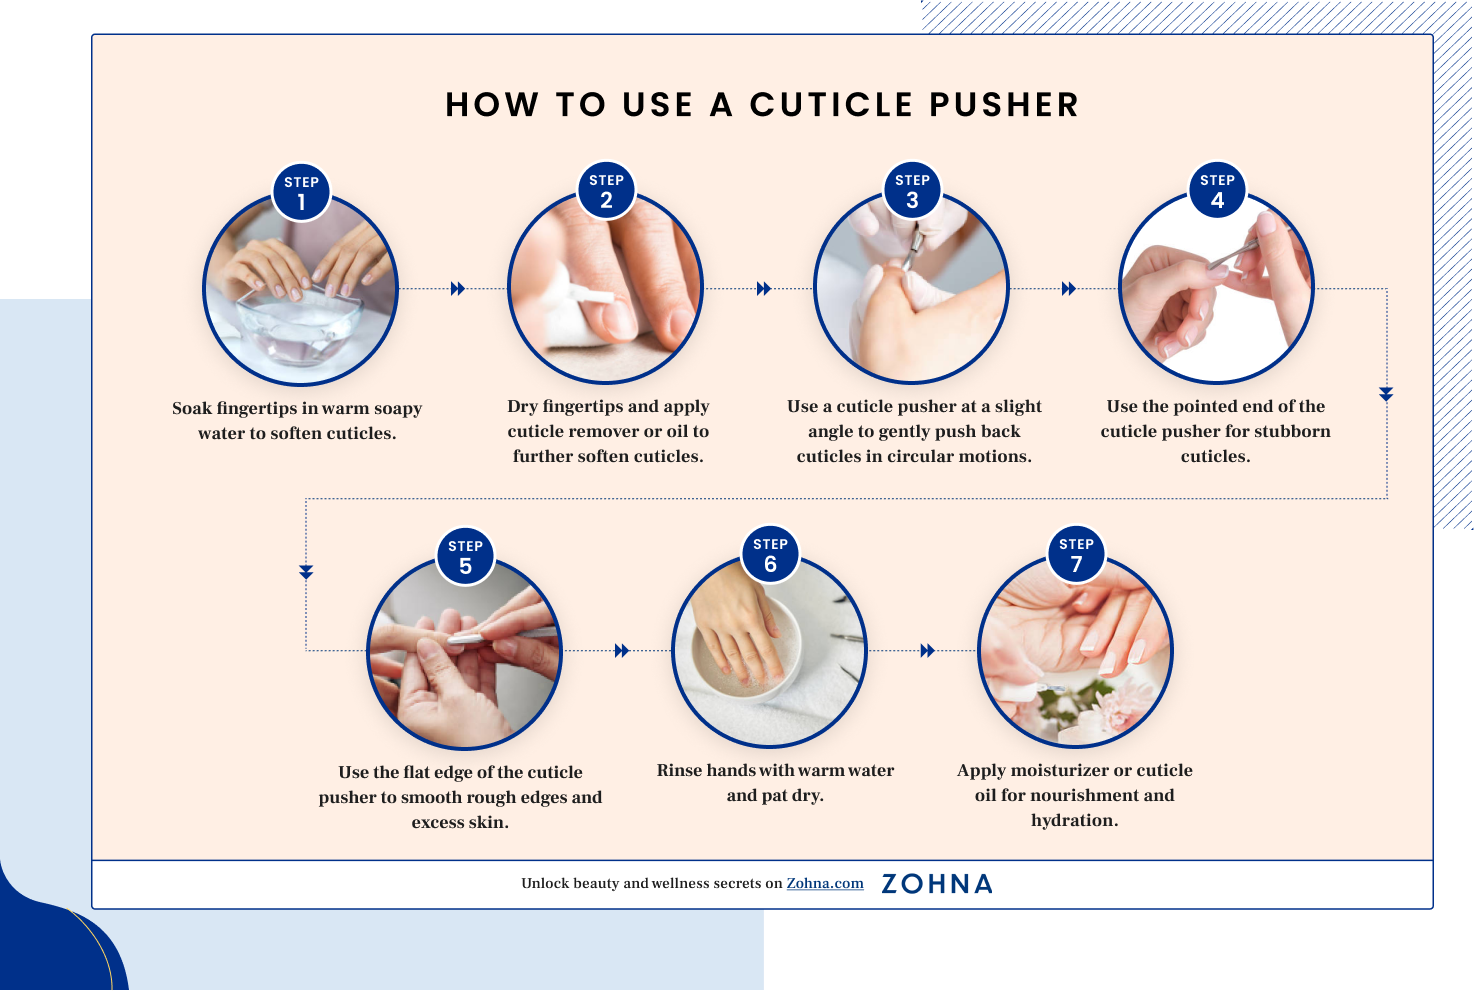 How to Use a Cuticle Pusher